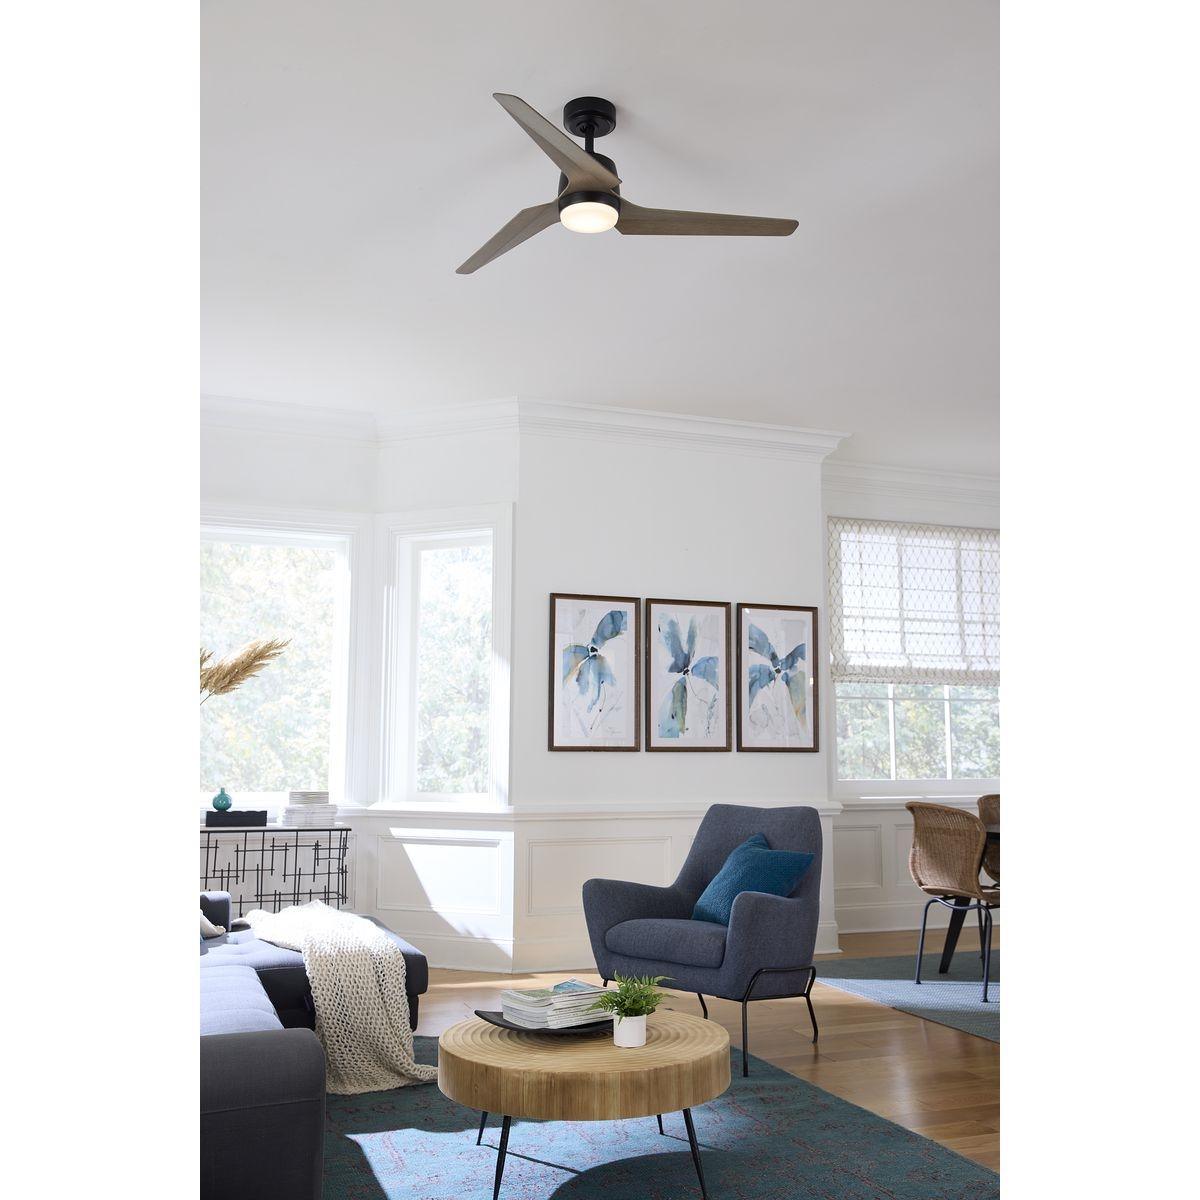 Upshur 52 Inch Modern Propeller Outdoor Ceiling Fan With Light And Remote